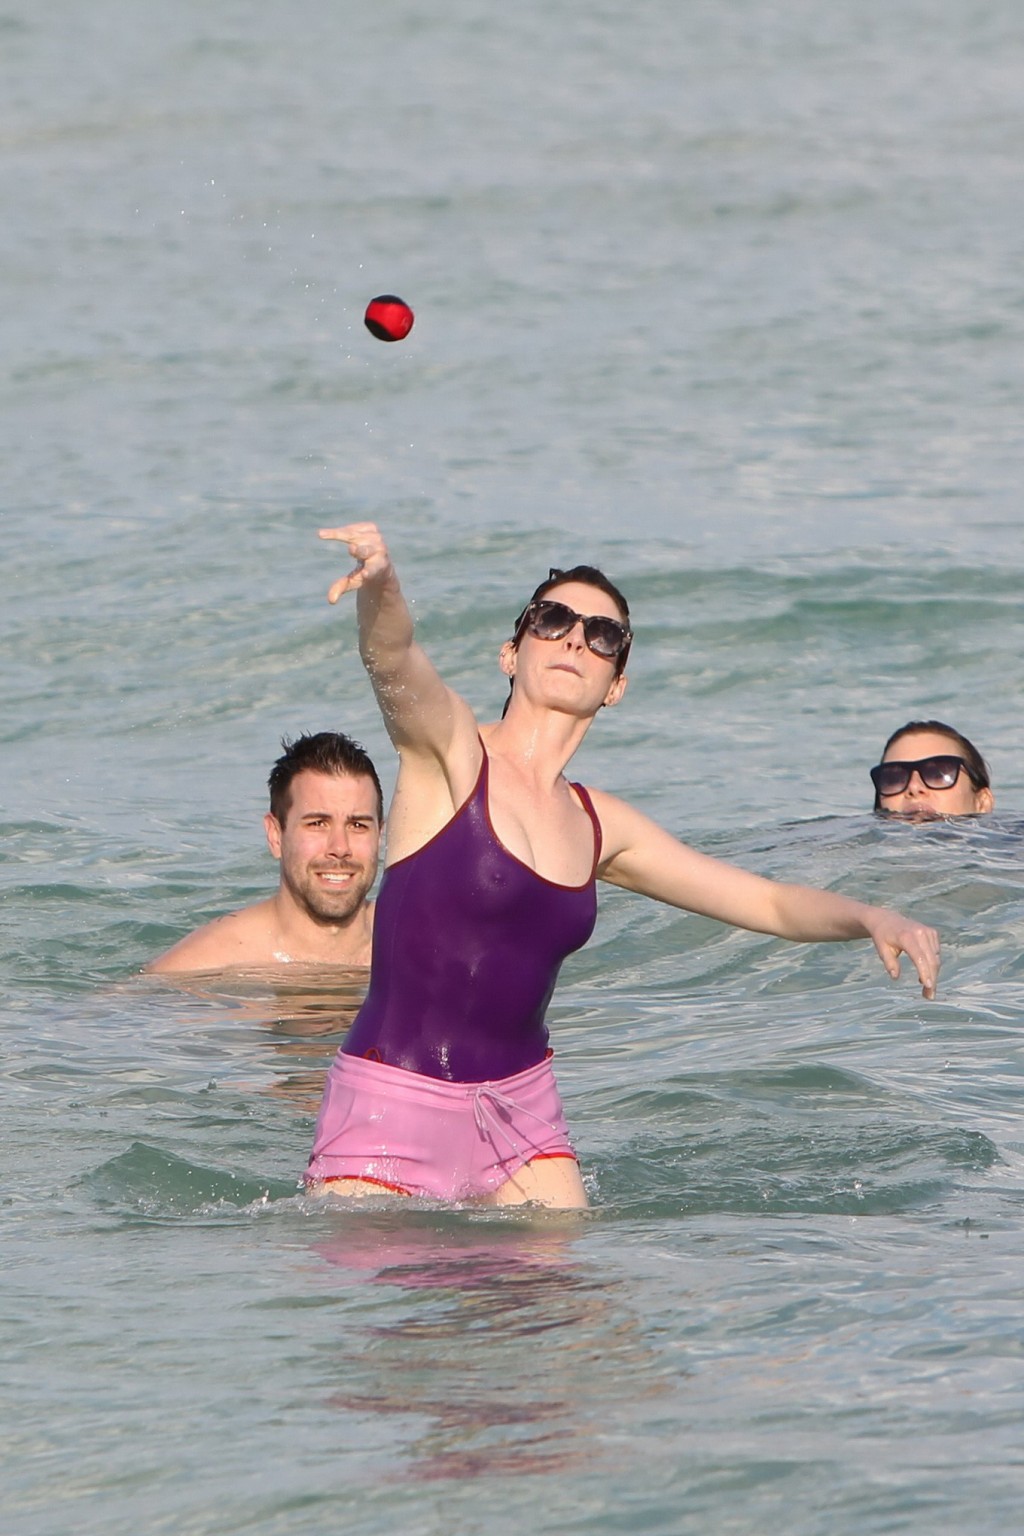 Anne Hathaway wearing wet purple see-through swimsuit and shorts at the beach in #75200981